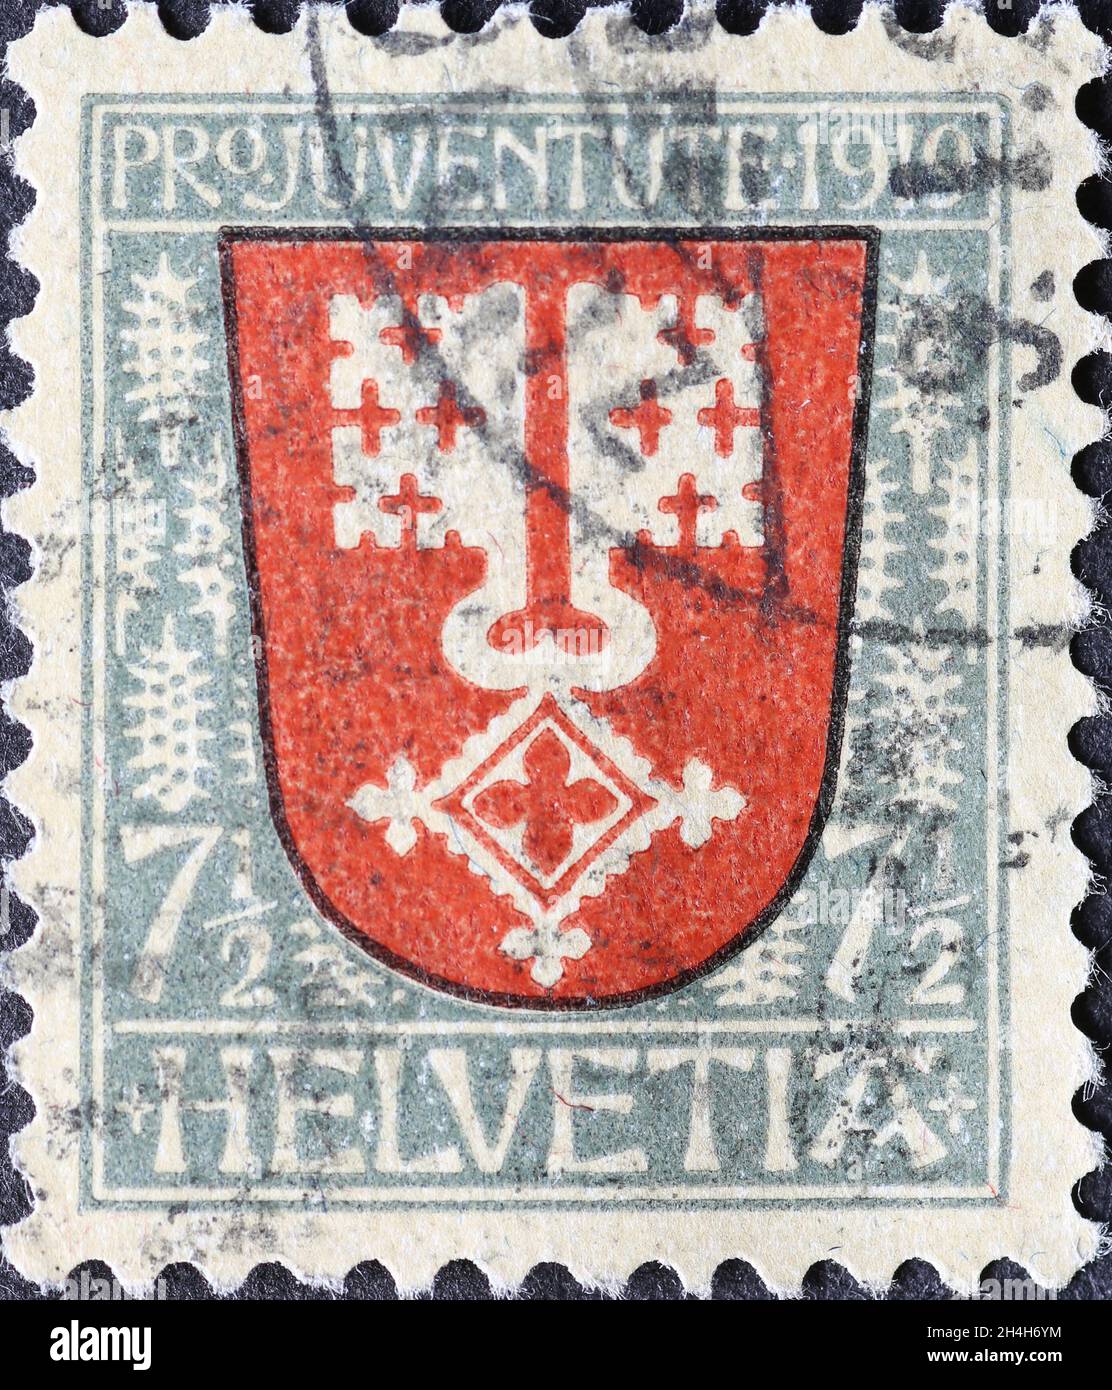 Switzerland - Circa 1919: a postage stamp printed in the Switzerland showing a double key on the coat of arms of the Swiss canton of Nidwalden on a ch Stock Photo